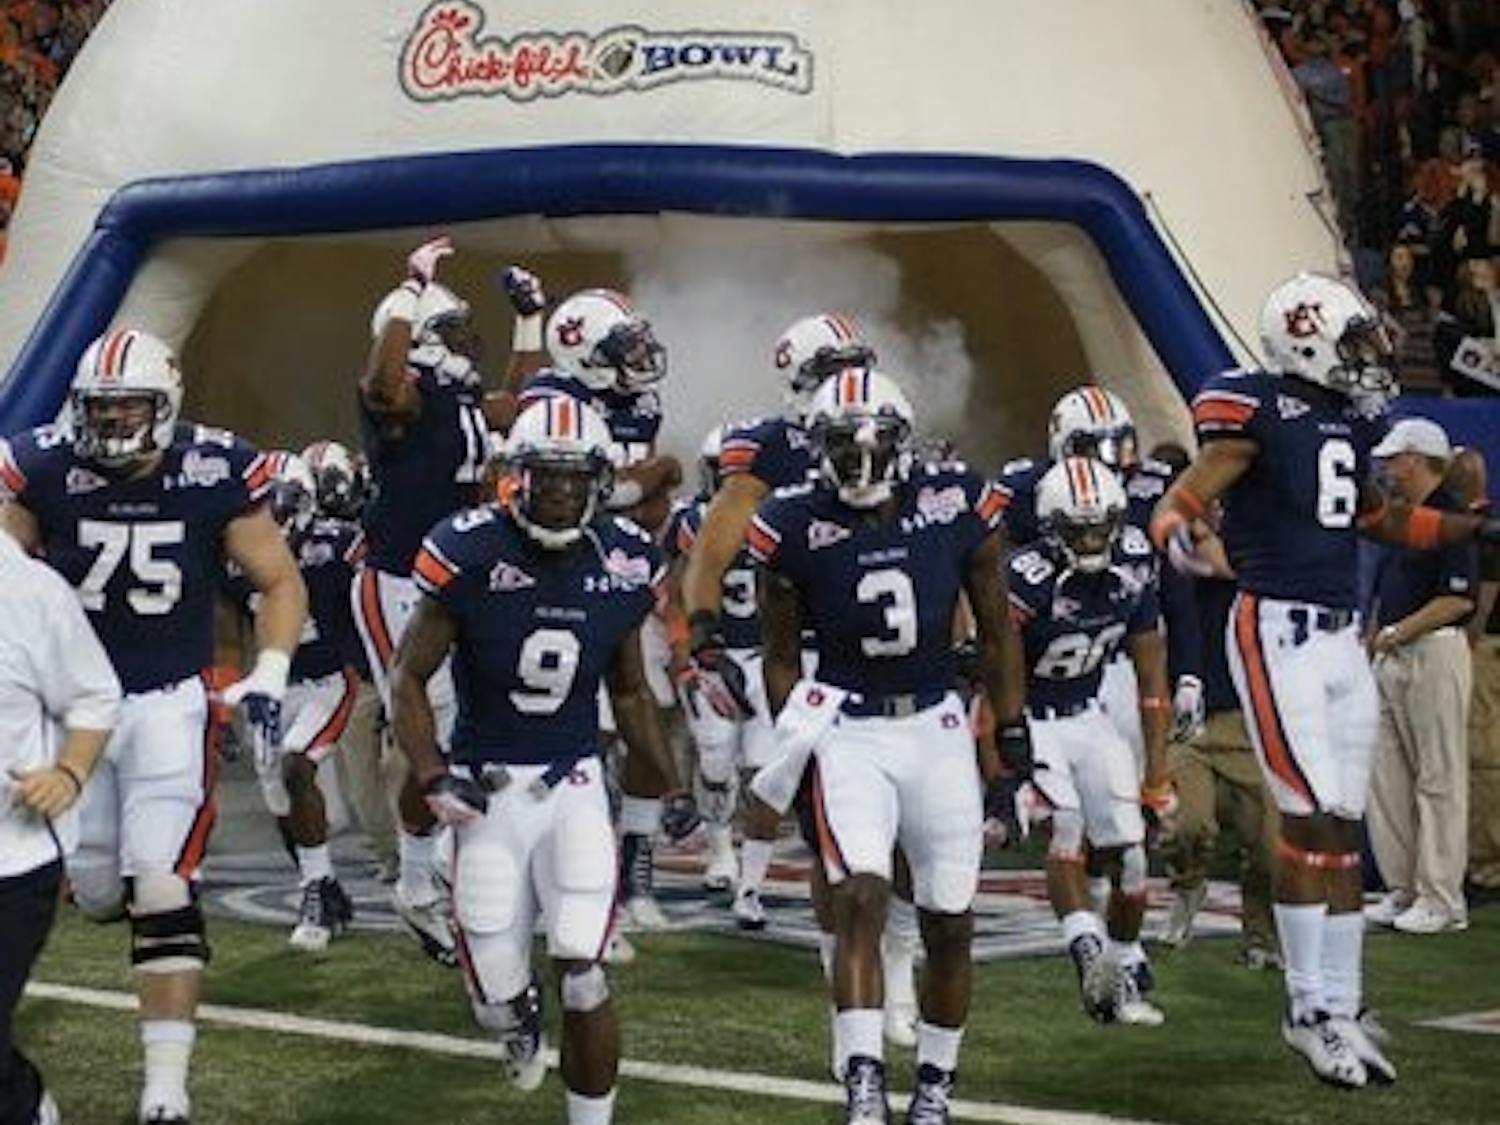 It has been nearly seven months since the Tigers have hit the turf, but they will return to Atlanta for the first game of the season in the   Chick-Fil-A Kickoff Game on Sept. 1 in the Georgia Dome against Clemson.